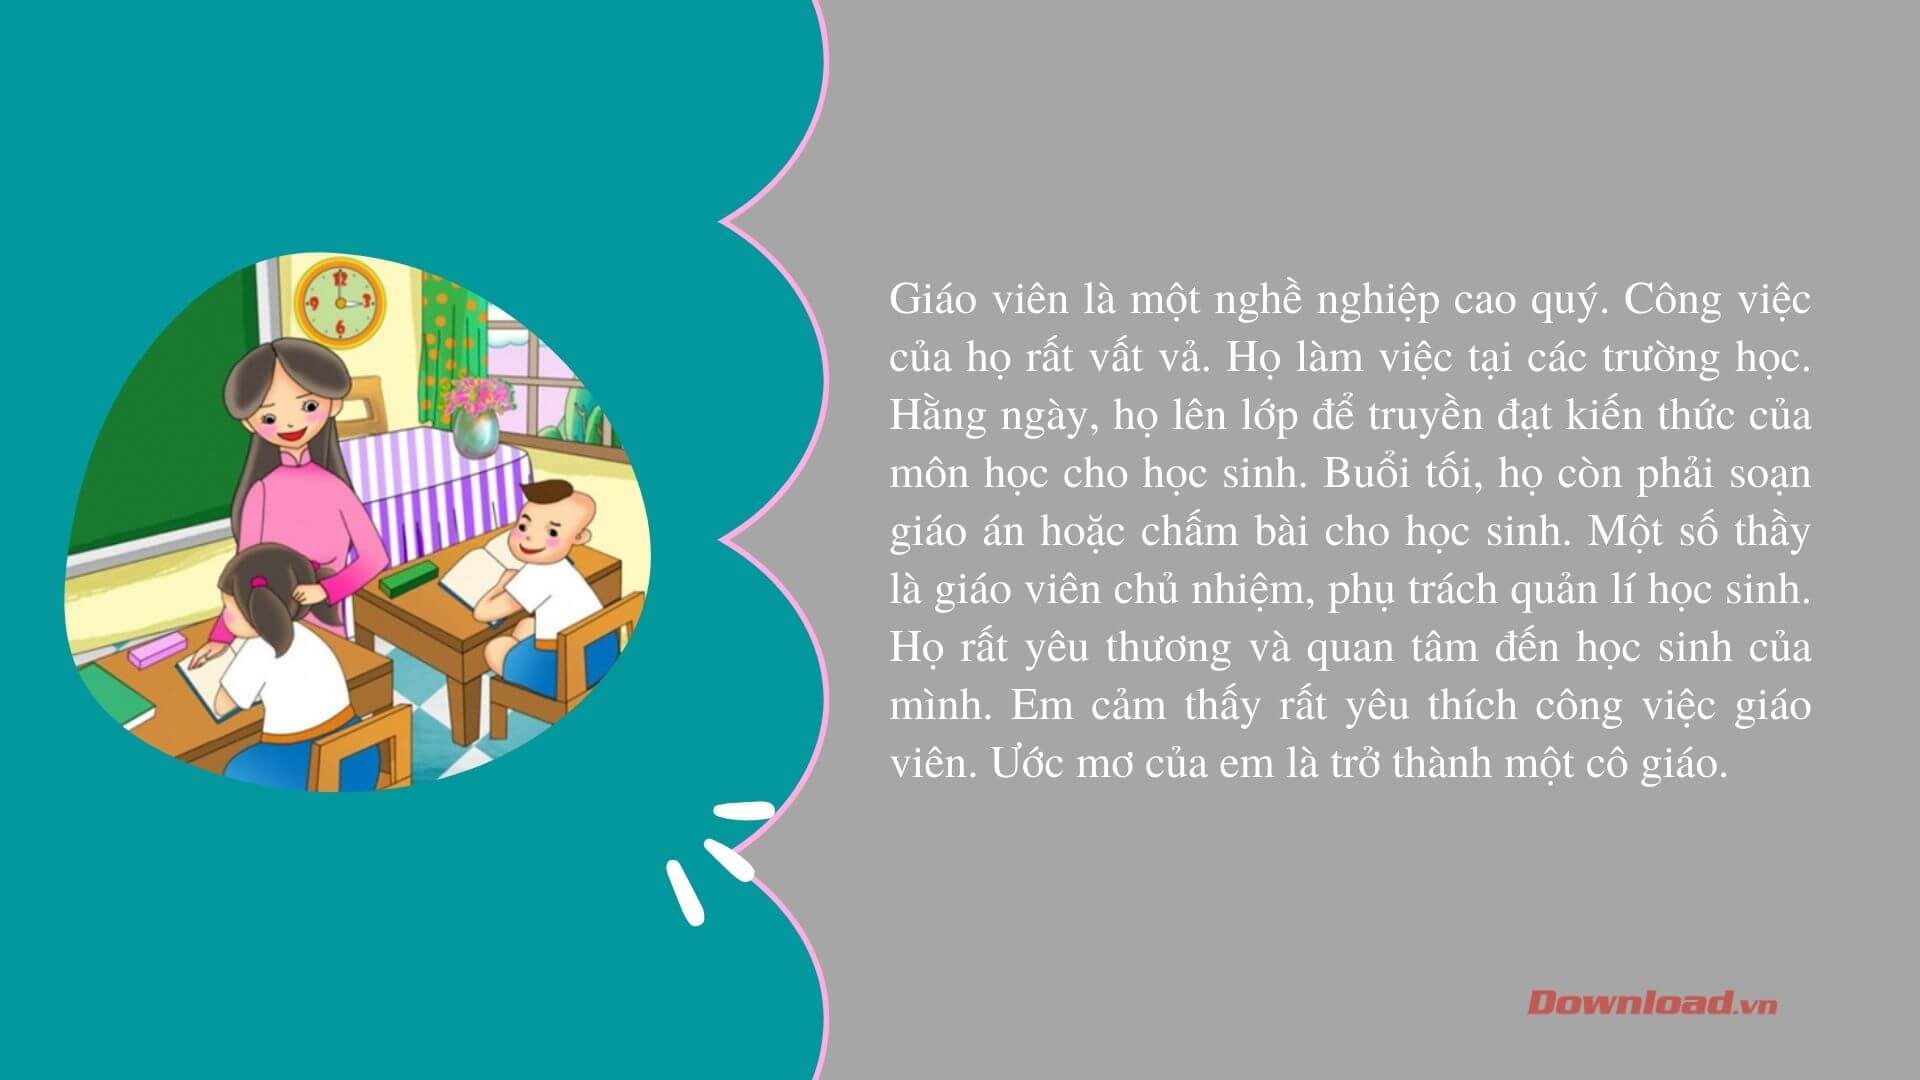 nghe nghiep giao vien